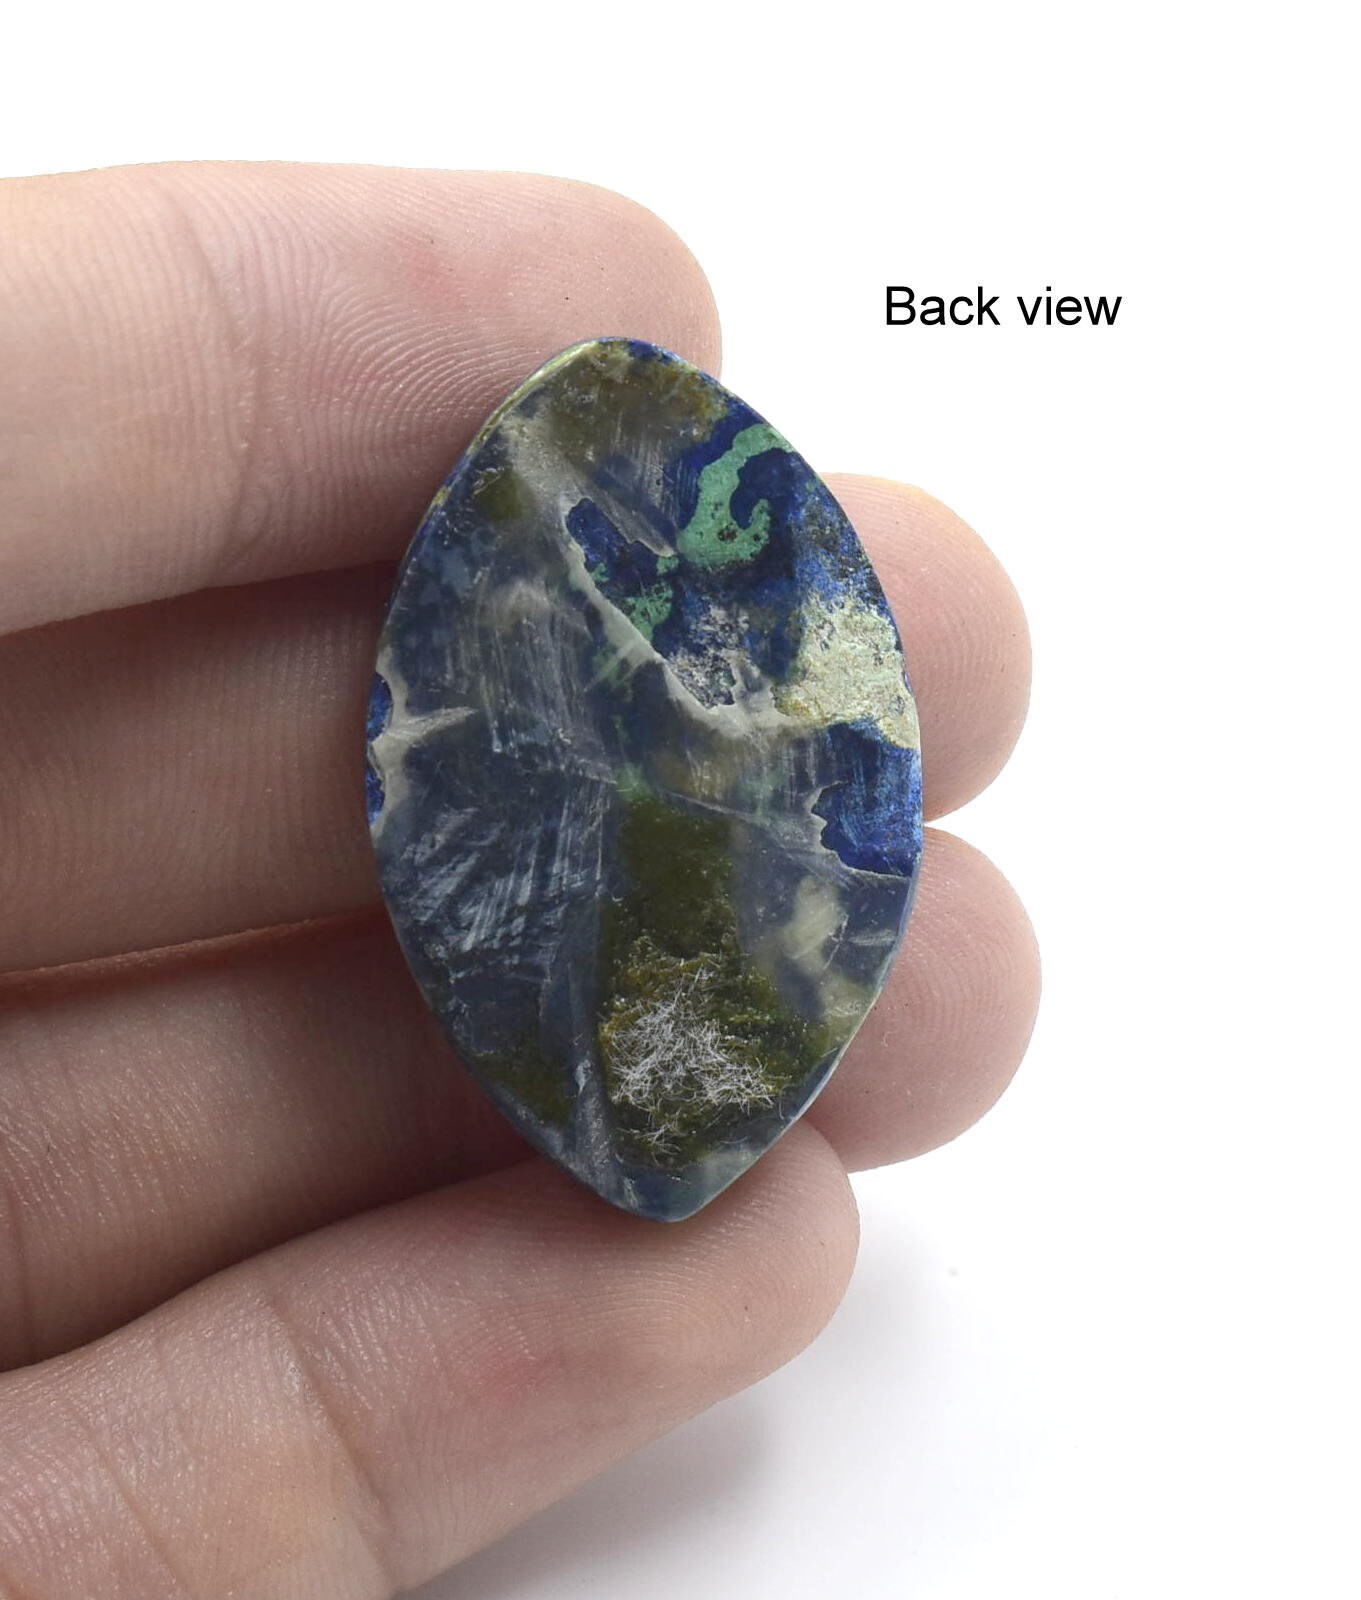 100% Natural Azurite Malachite Cabochon Good quality stone Beautiful Art Making for jewellery Ring 43.60 CARAT 33X21 MM | Save 33% - Rajasthan Living 15